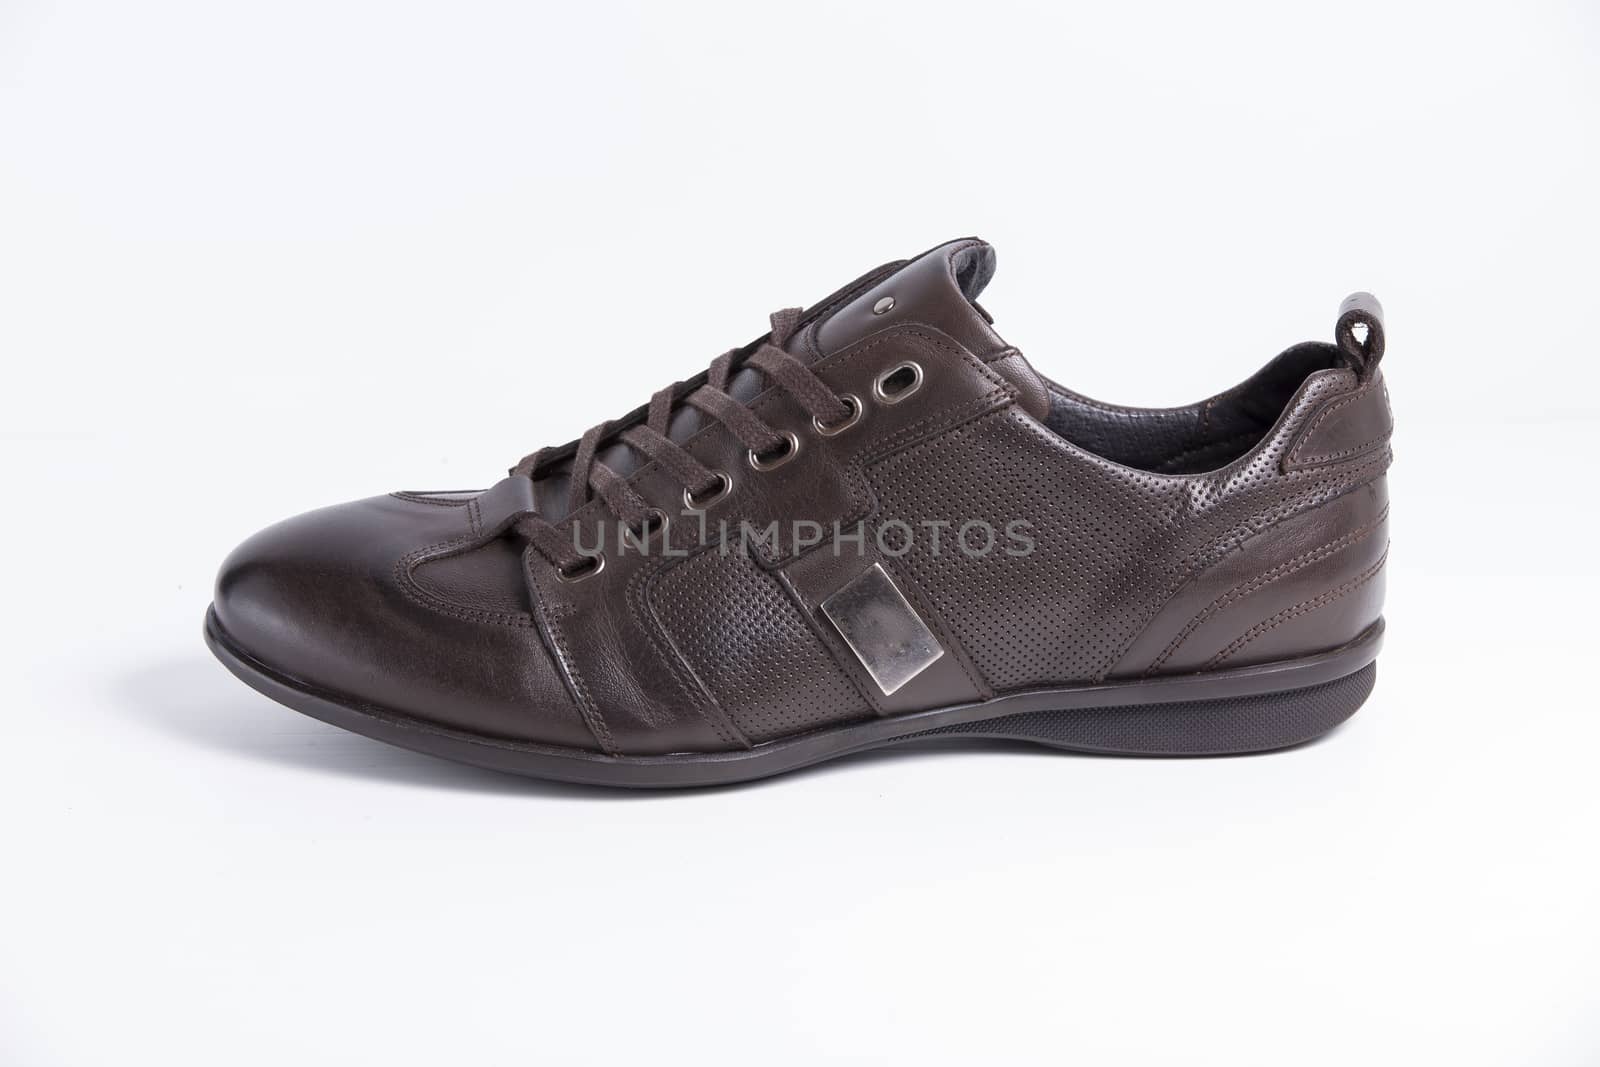 Brown leather shoe on white background, isolated product.